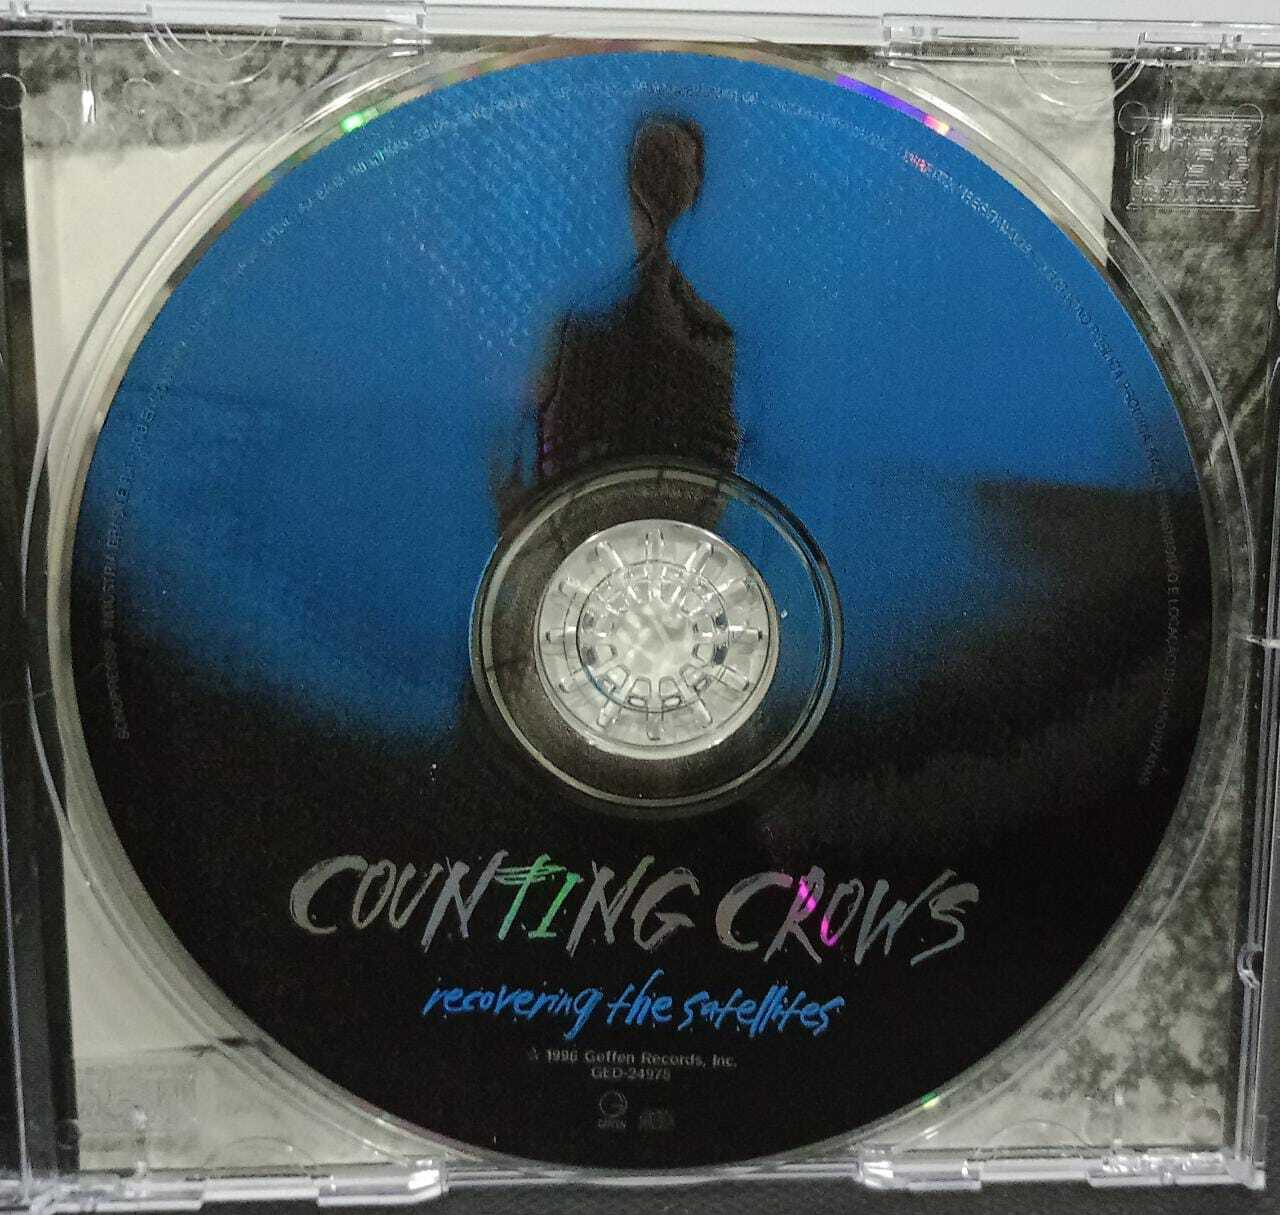 CD - Counting Crows - Recovering the Satellites